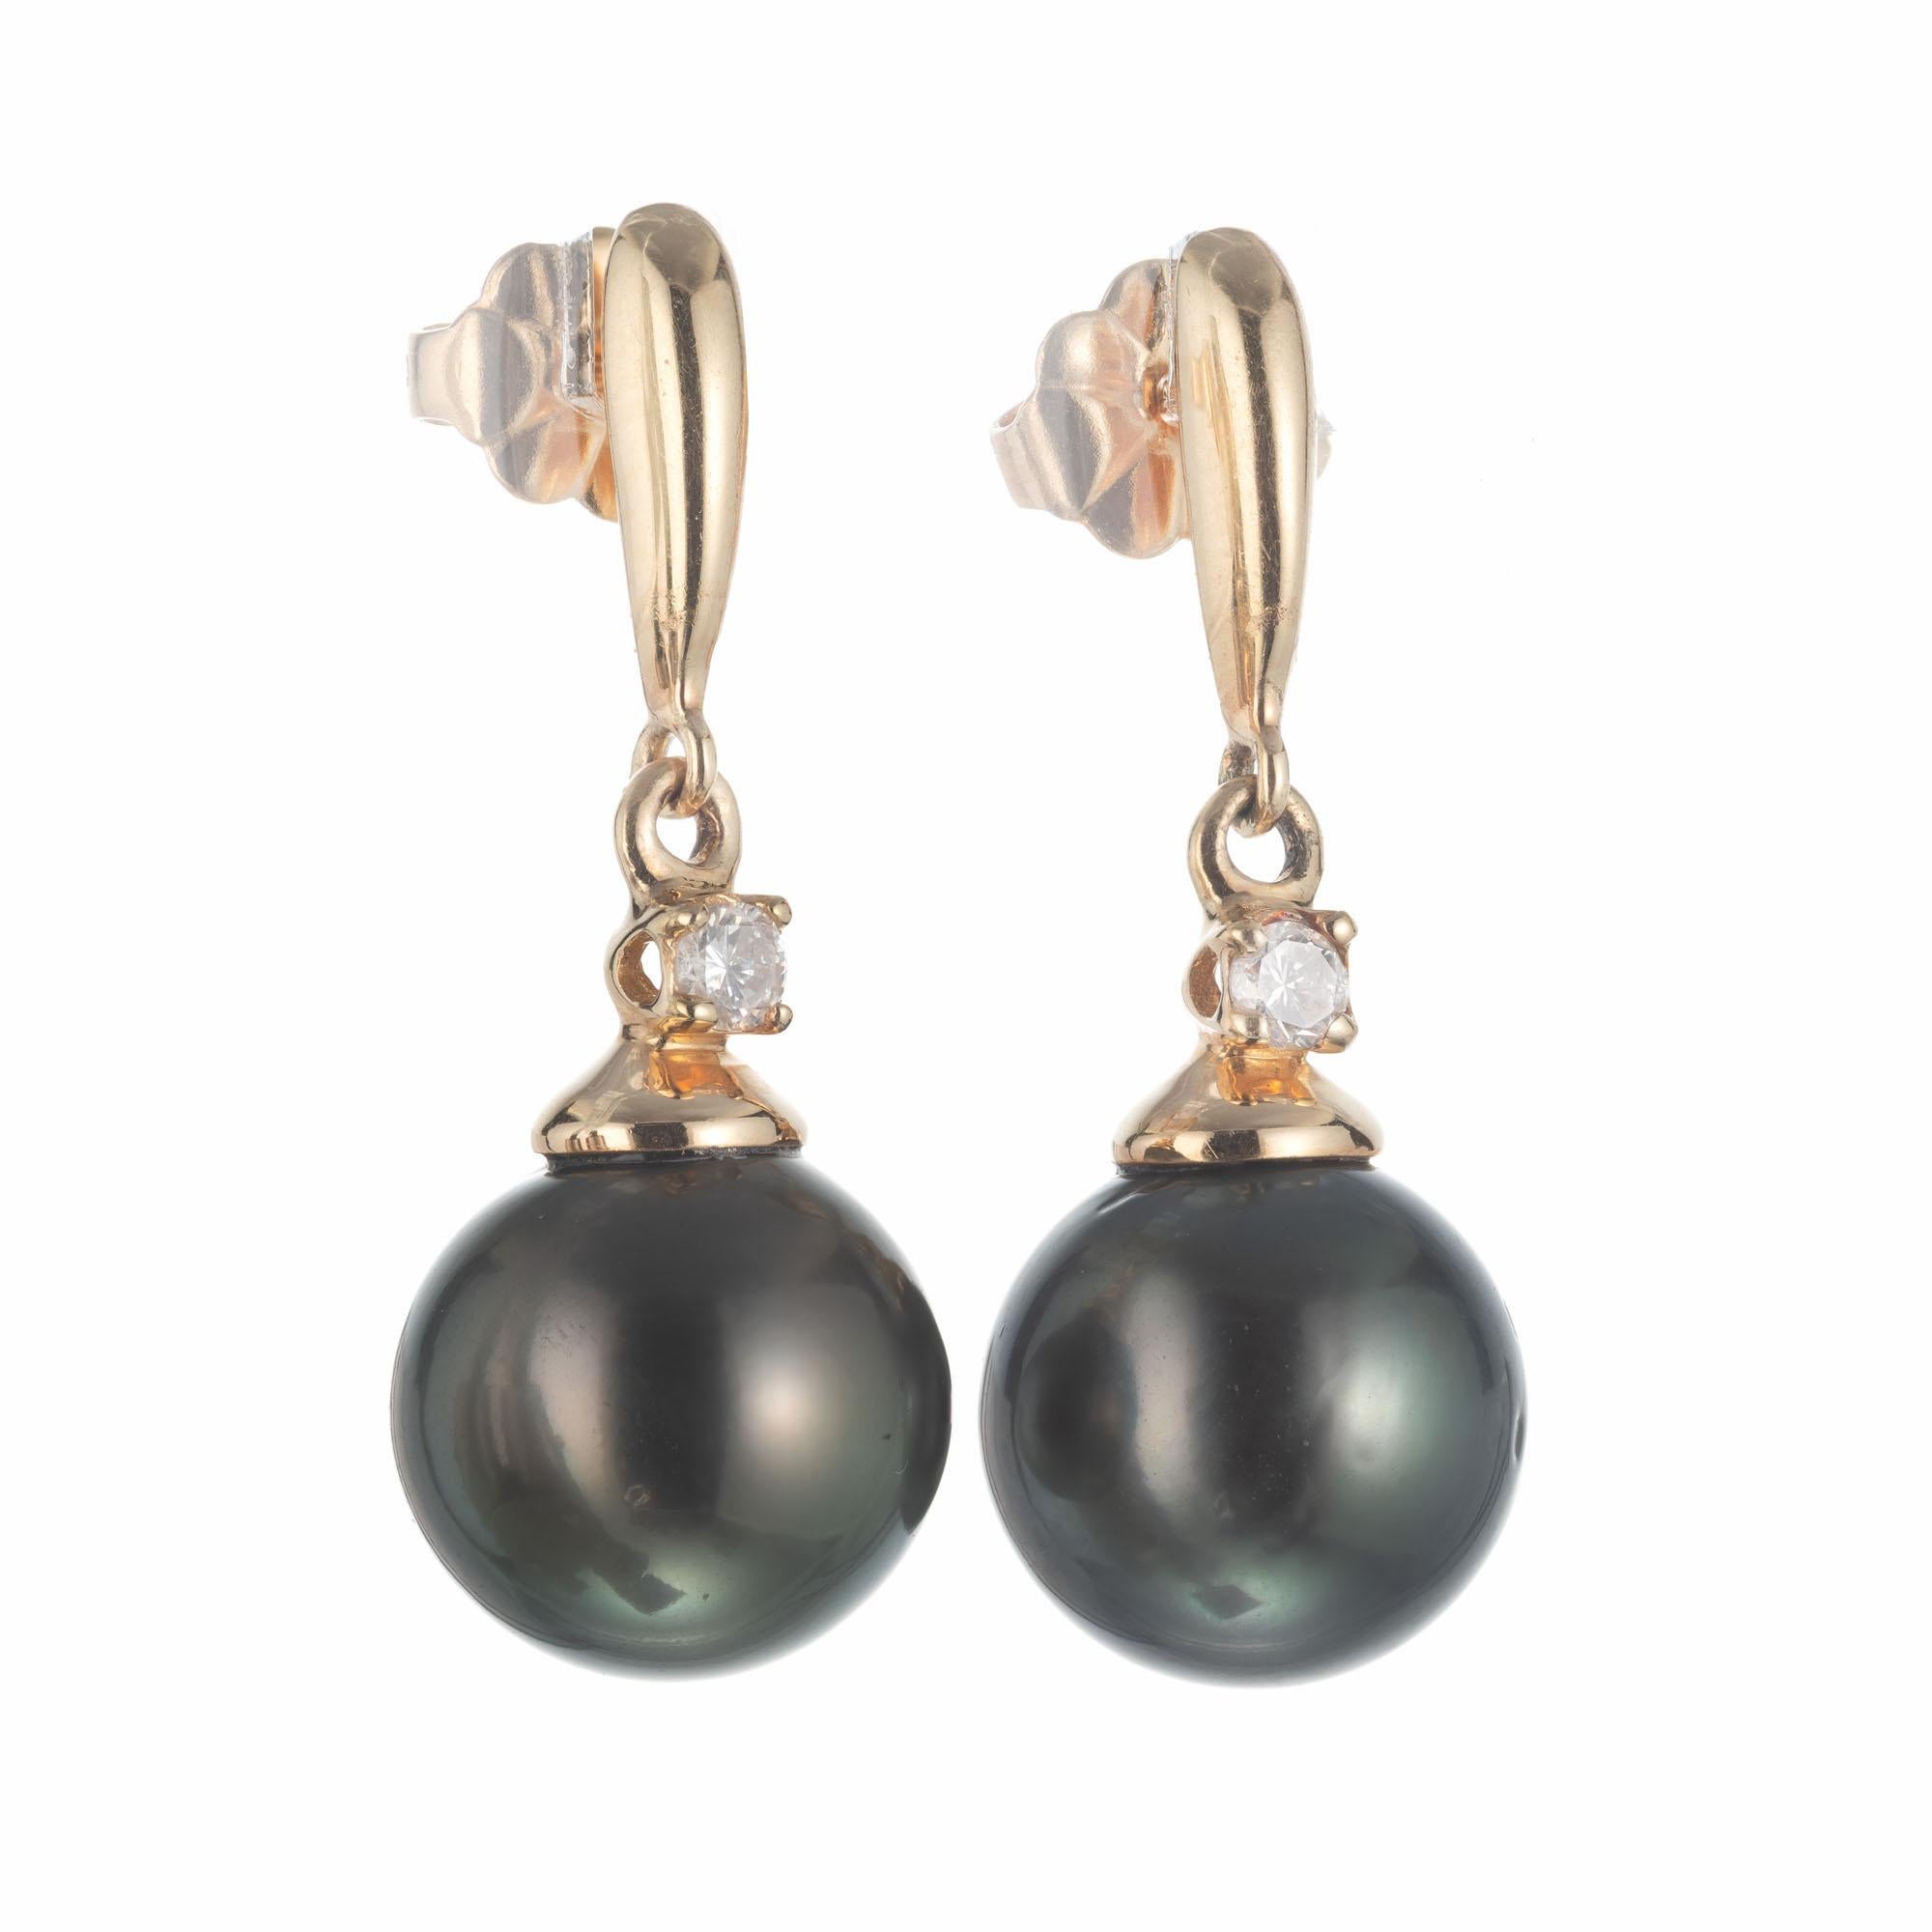 Natural color black 9.5mm cultured Japanese pearl dangle earrings with full cut accent diamonds in 14k yellow gold.

2 cultured black cultured 9.5mm pearls 
2 round brilliant cut diamonds, I-J SI2 approx. .10cts
14k yellow gold 
Stamped: 585
3.9